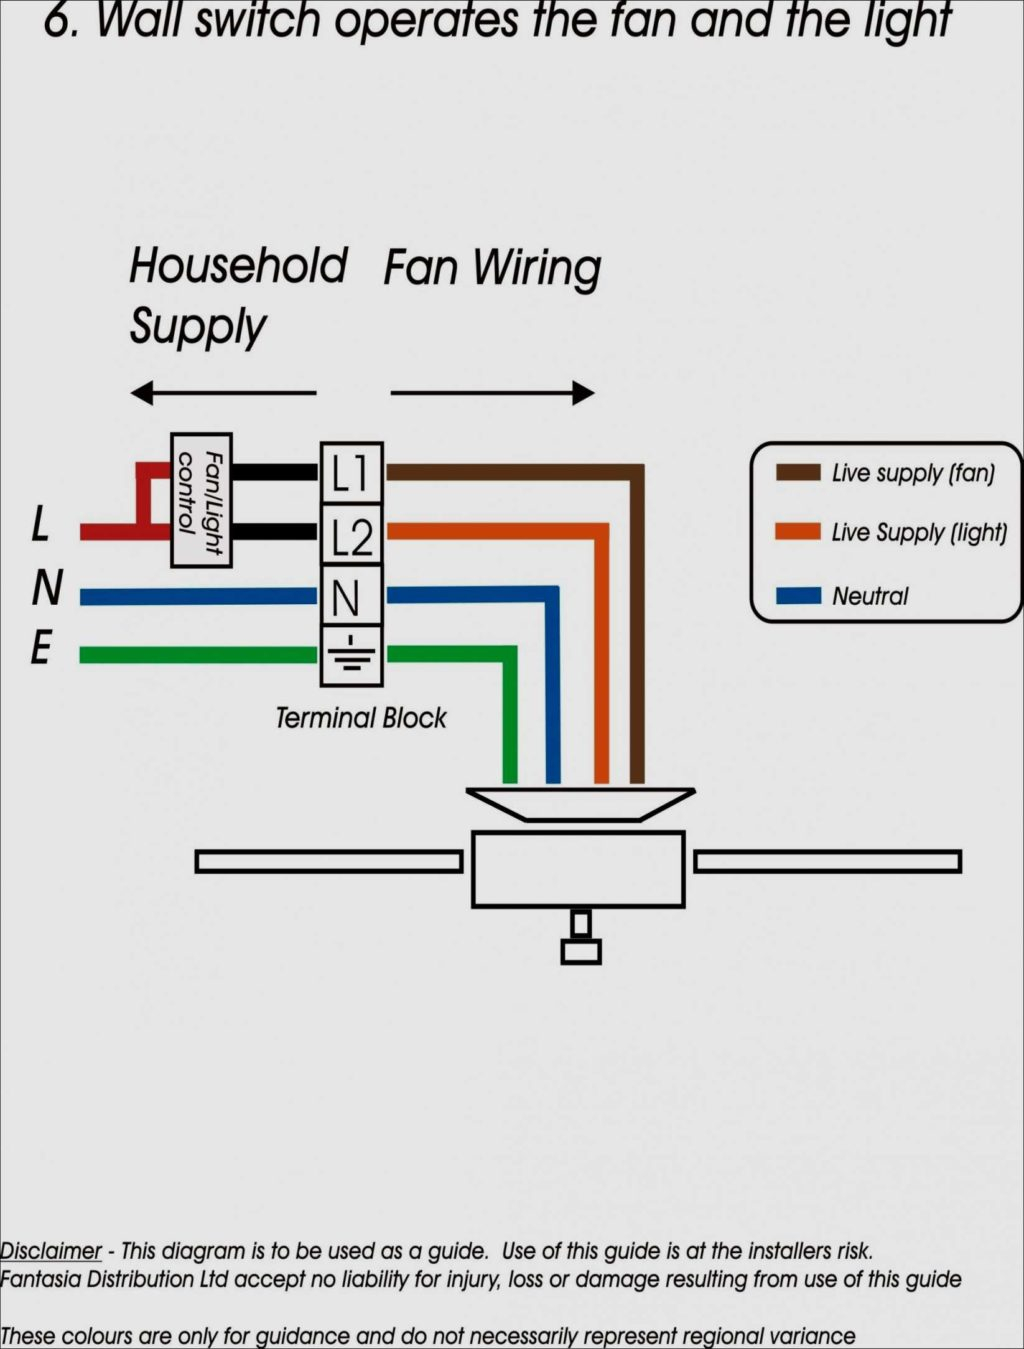 Ceiling Fan Pull Chain Light Switch Wiring Diagram Wiring Diagram How To Repair Pull Chain Light Switch In Ceiling